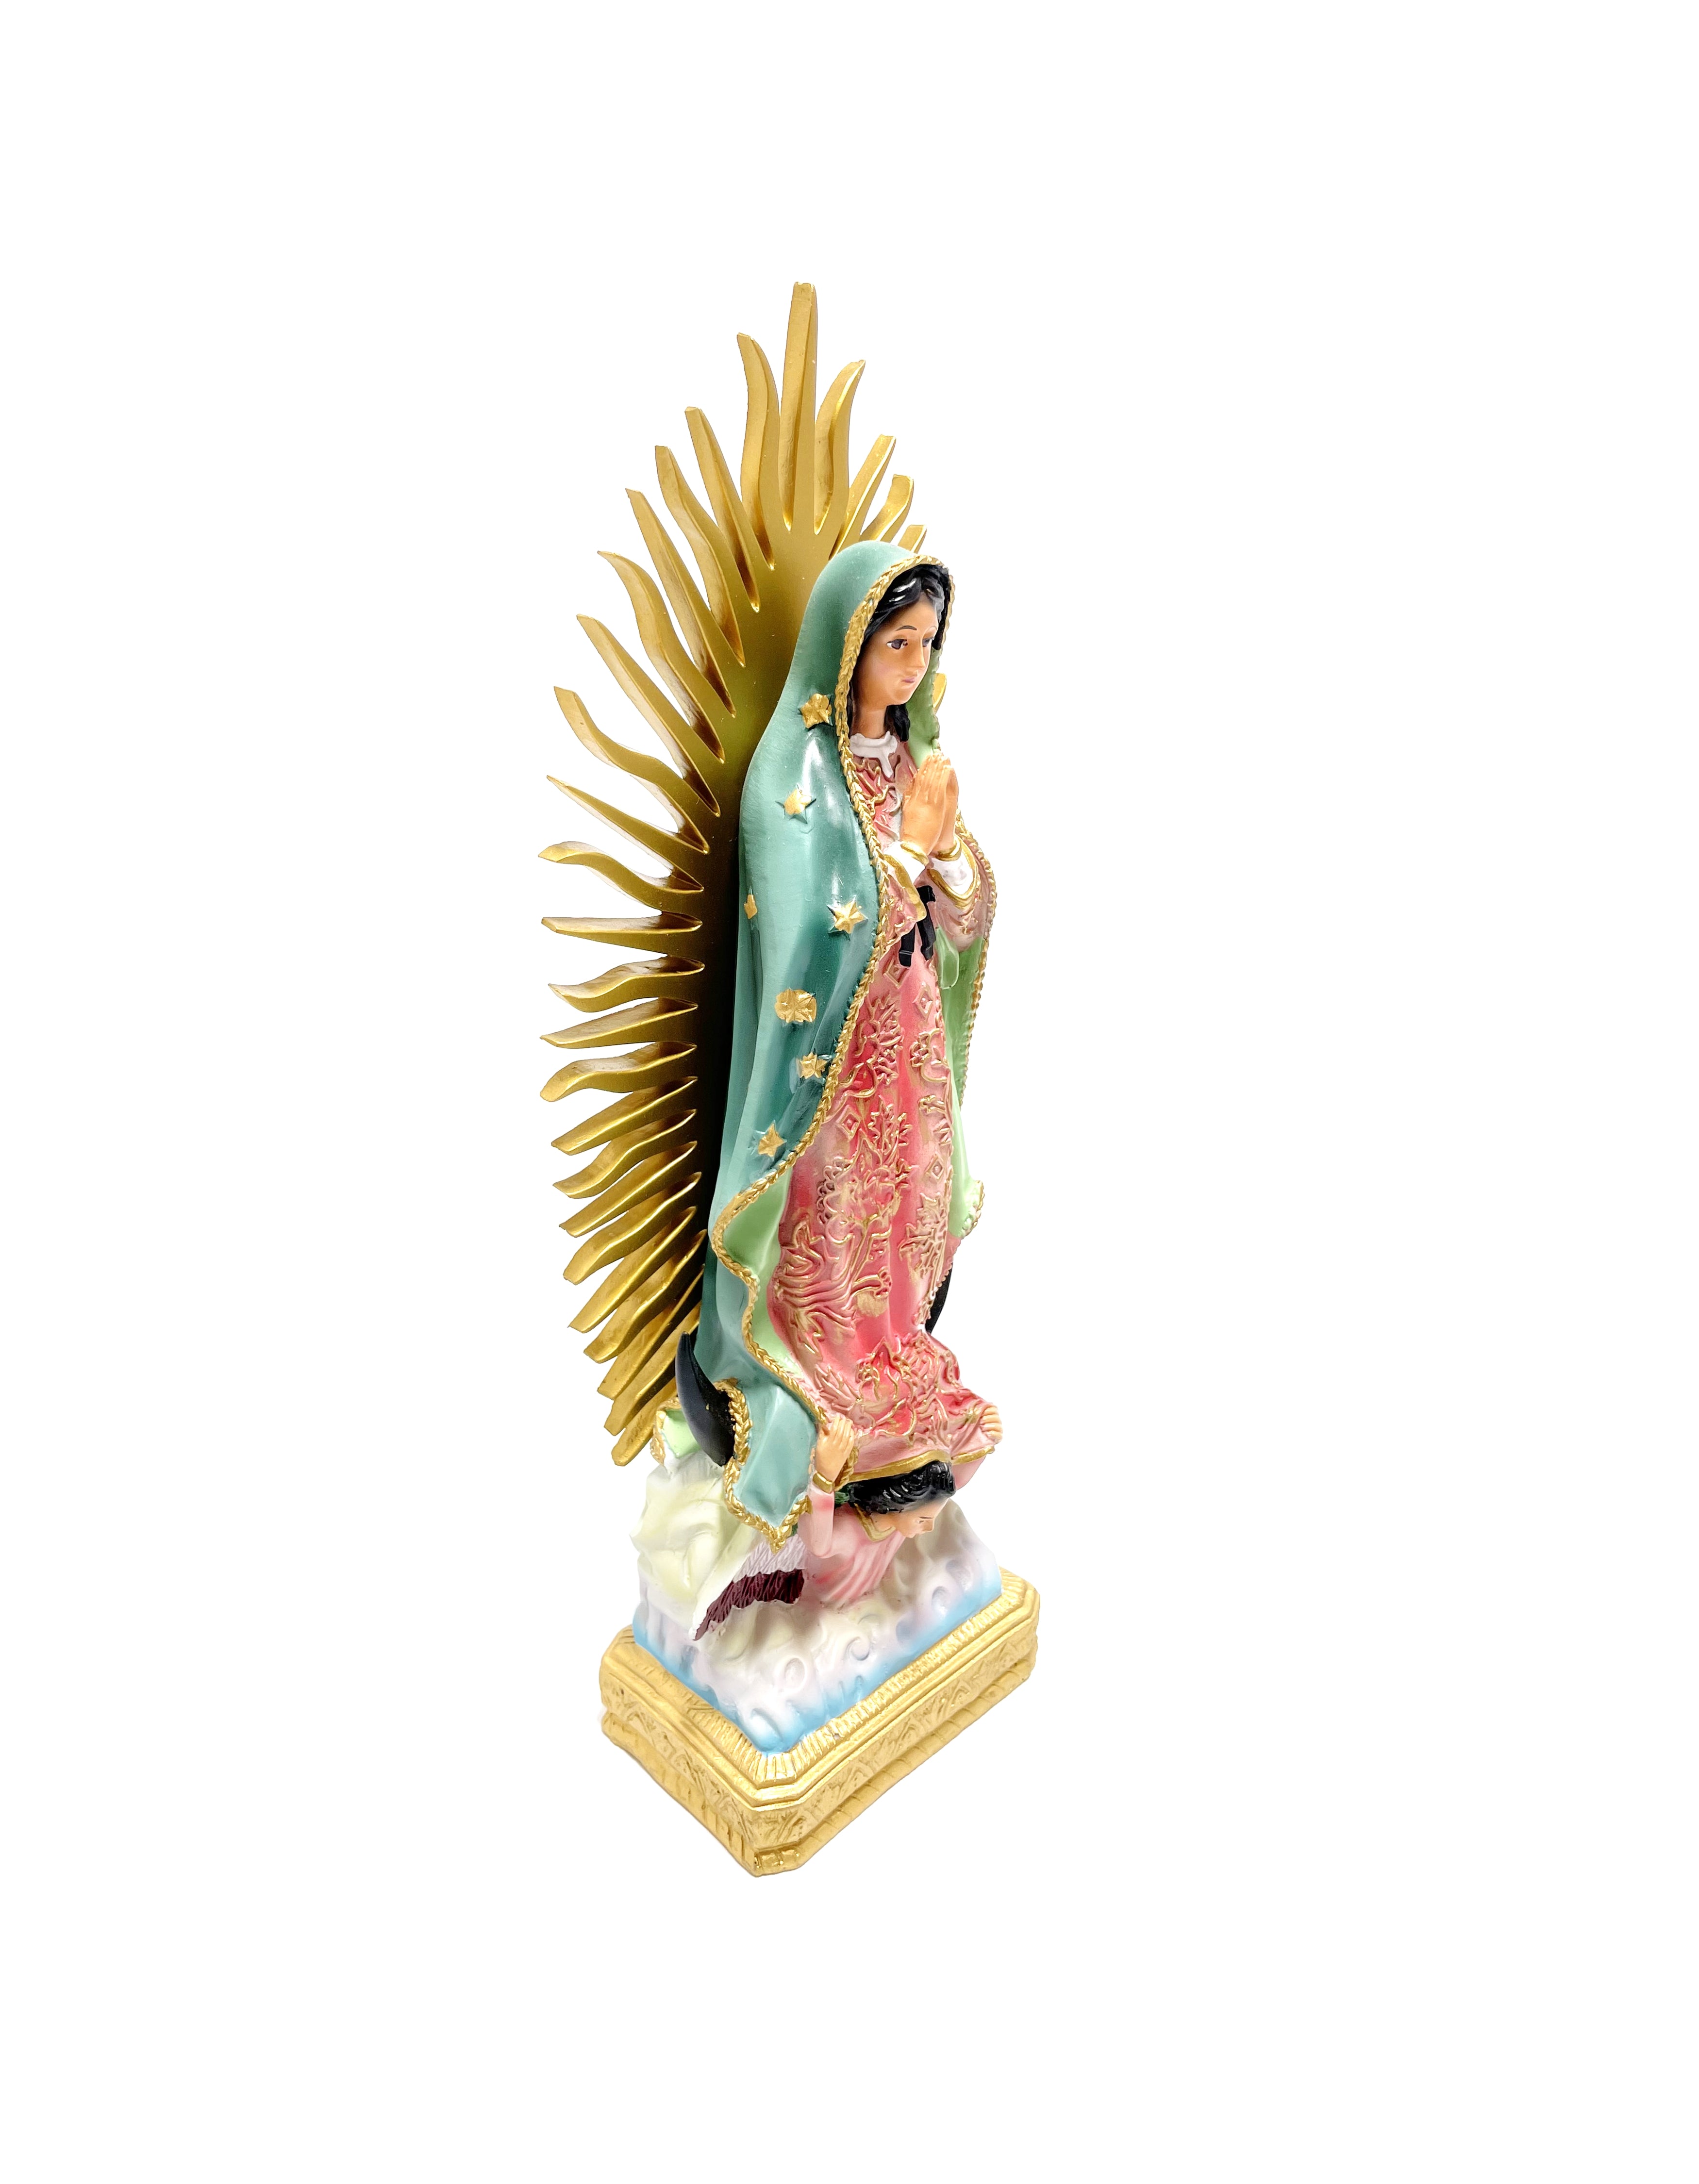 Religious statue of Our Lady of Guadalupe 12" height with gold rays